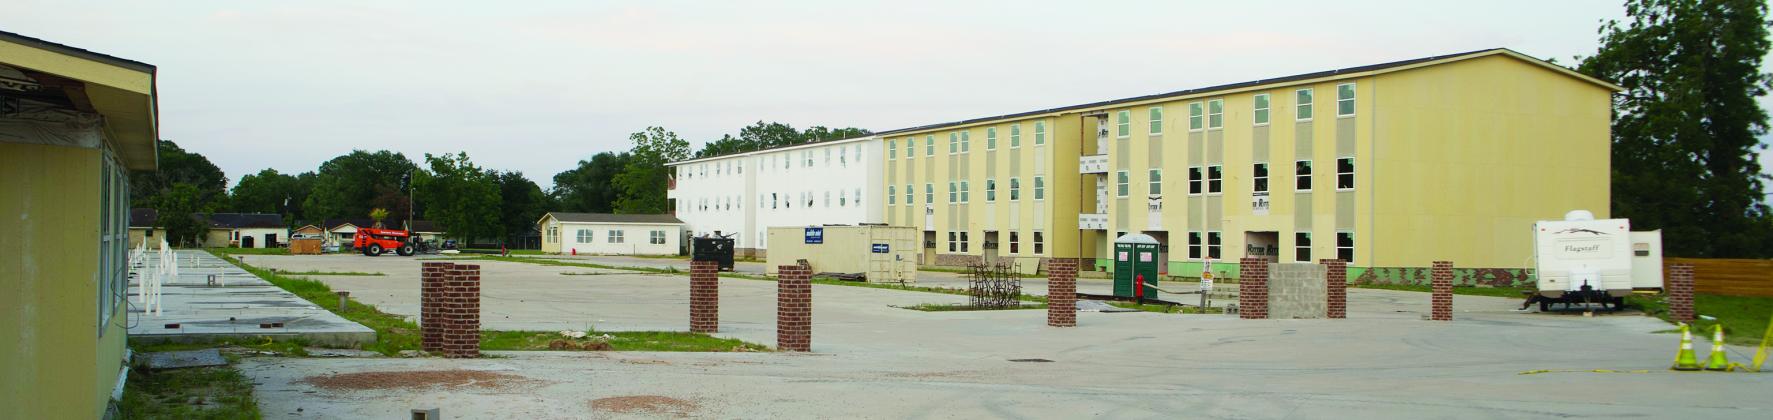 Kiralp’s first Beaumont investment, an apartment complex called The Palms at Cardinal, allegedly due to be open for Lamar University’s 2023 spring semester